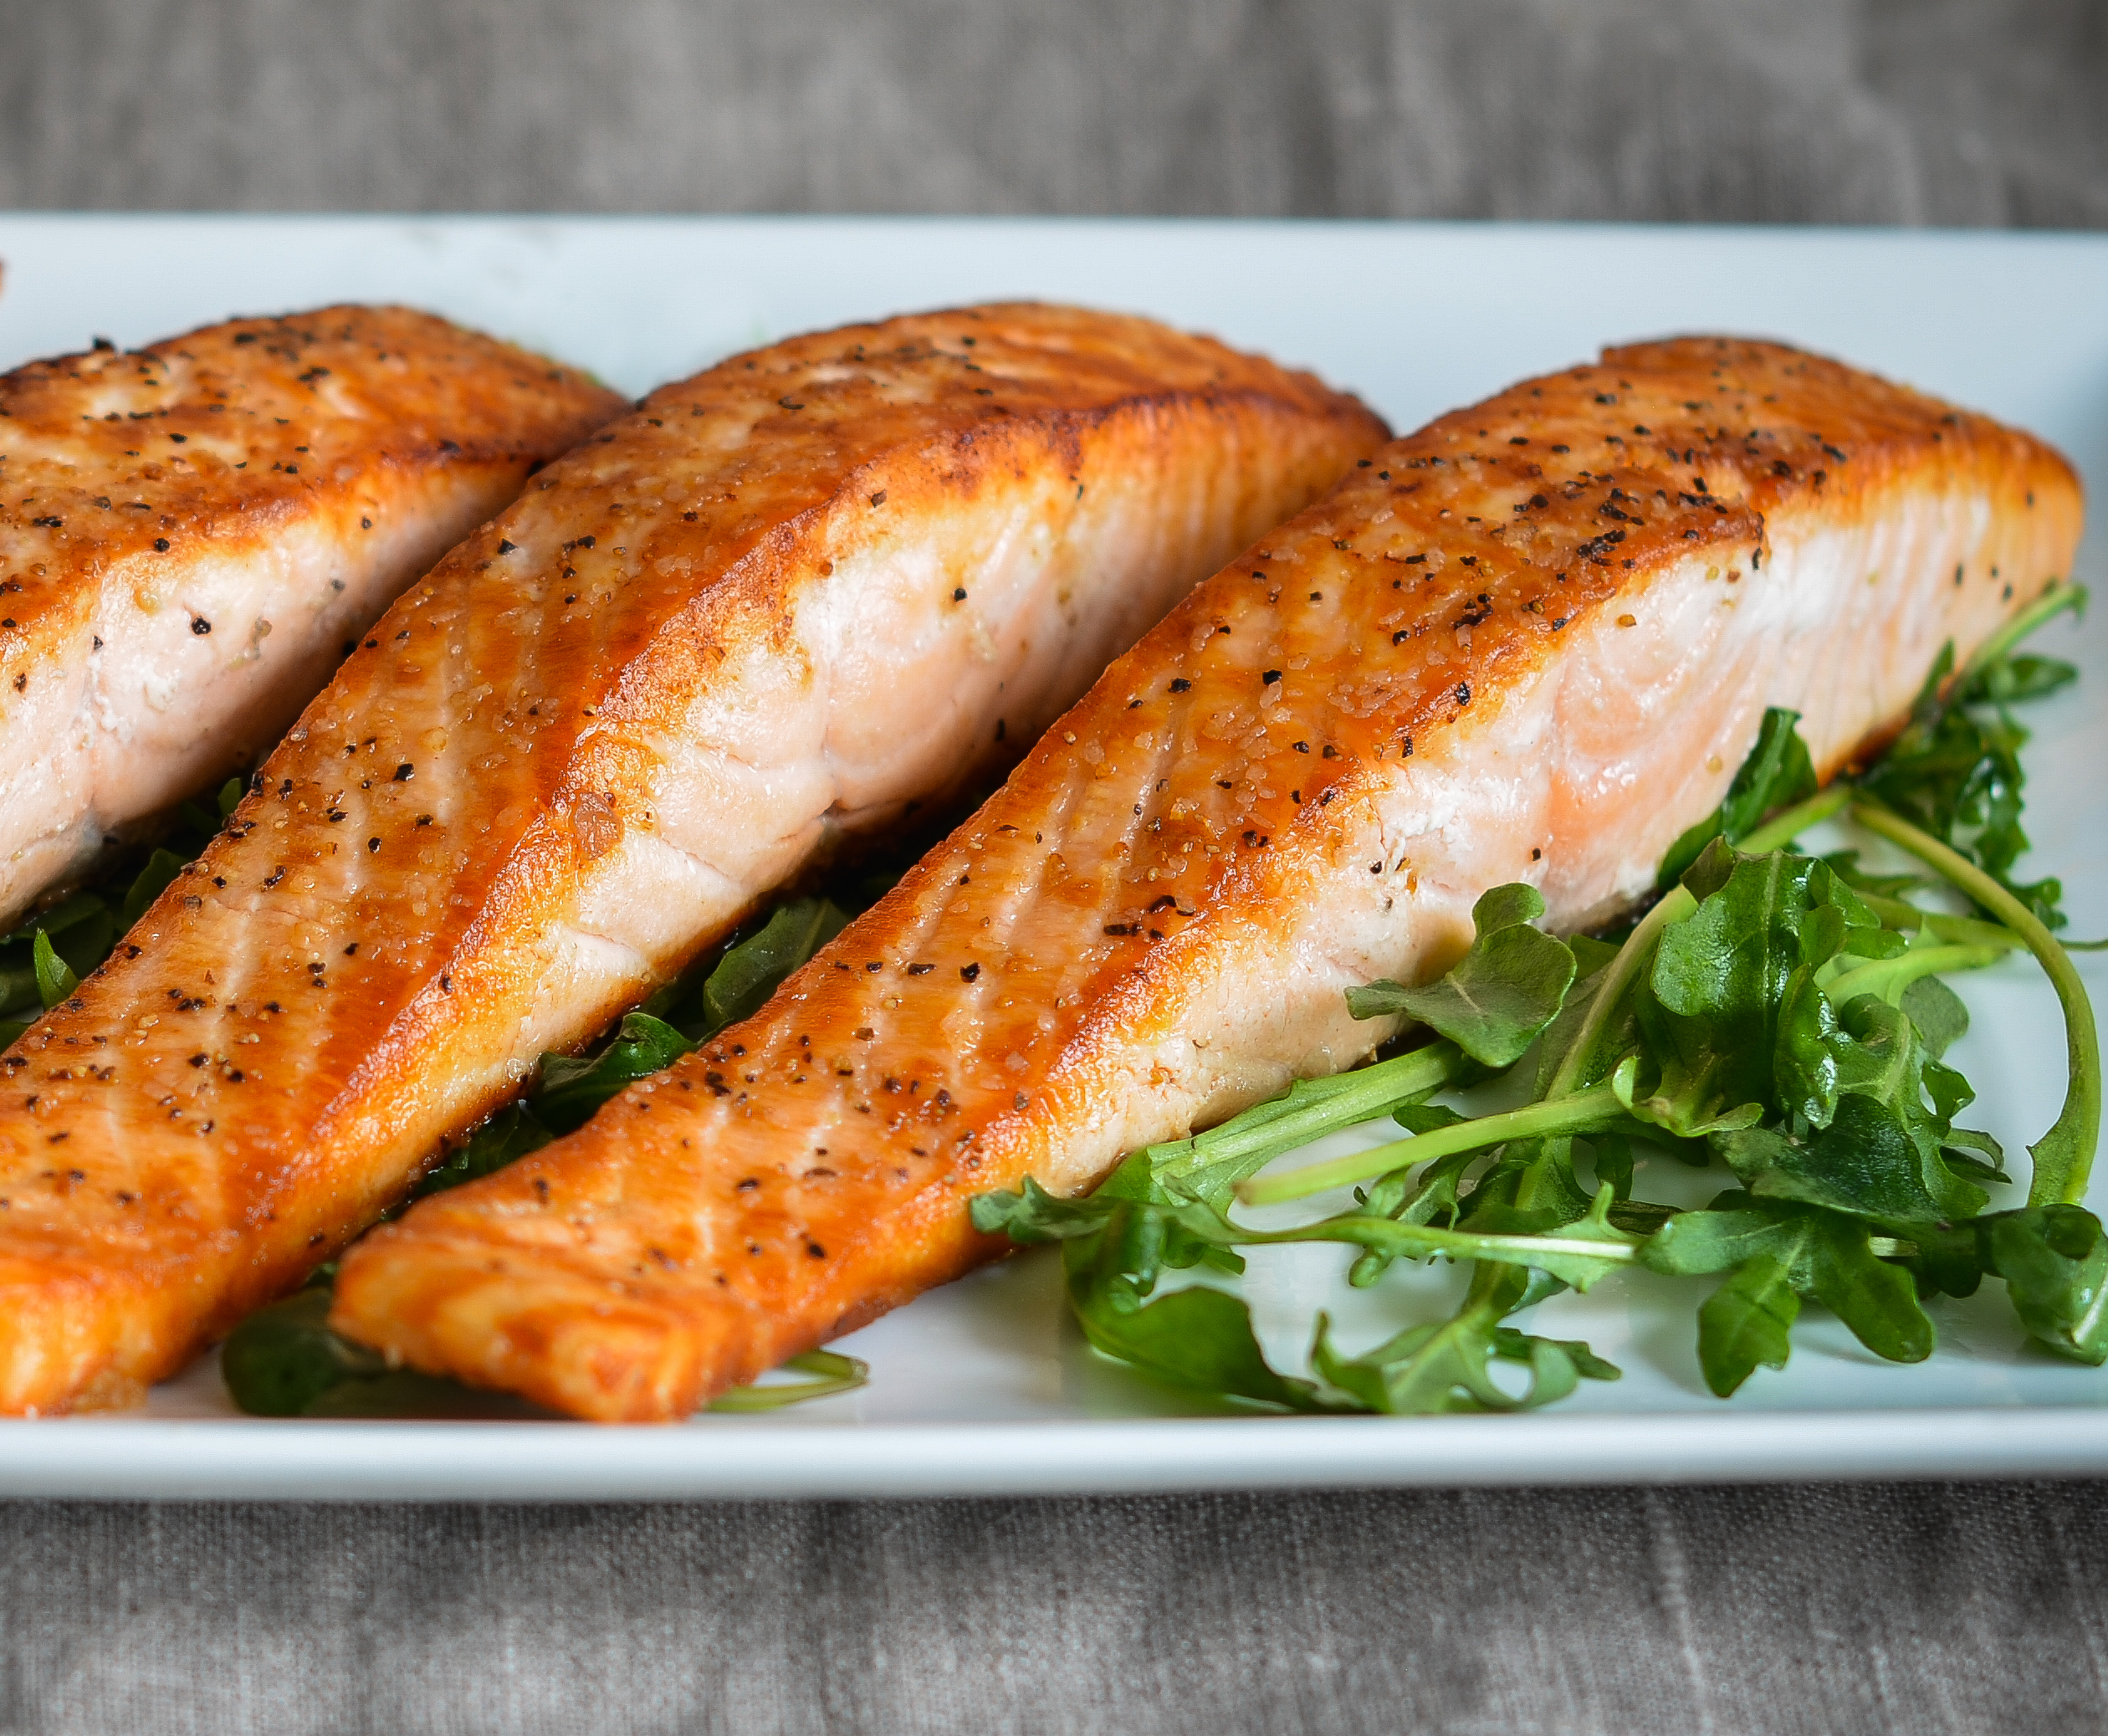 Restaurant Style Pan Seared Salmon Once Upon A Chef,Healthy Lunches For Kids